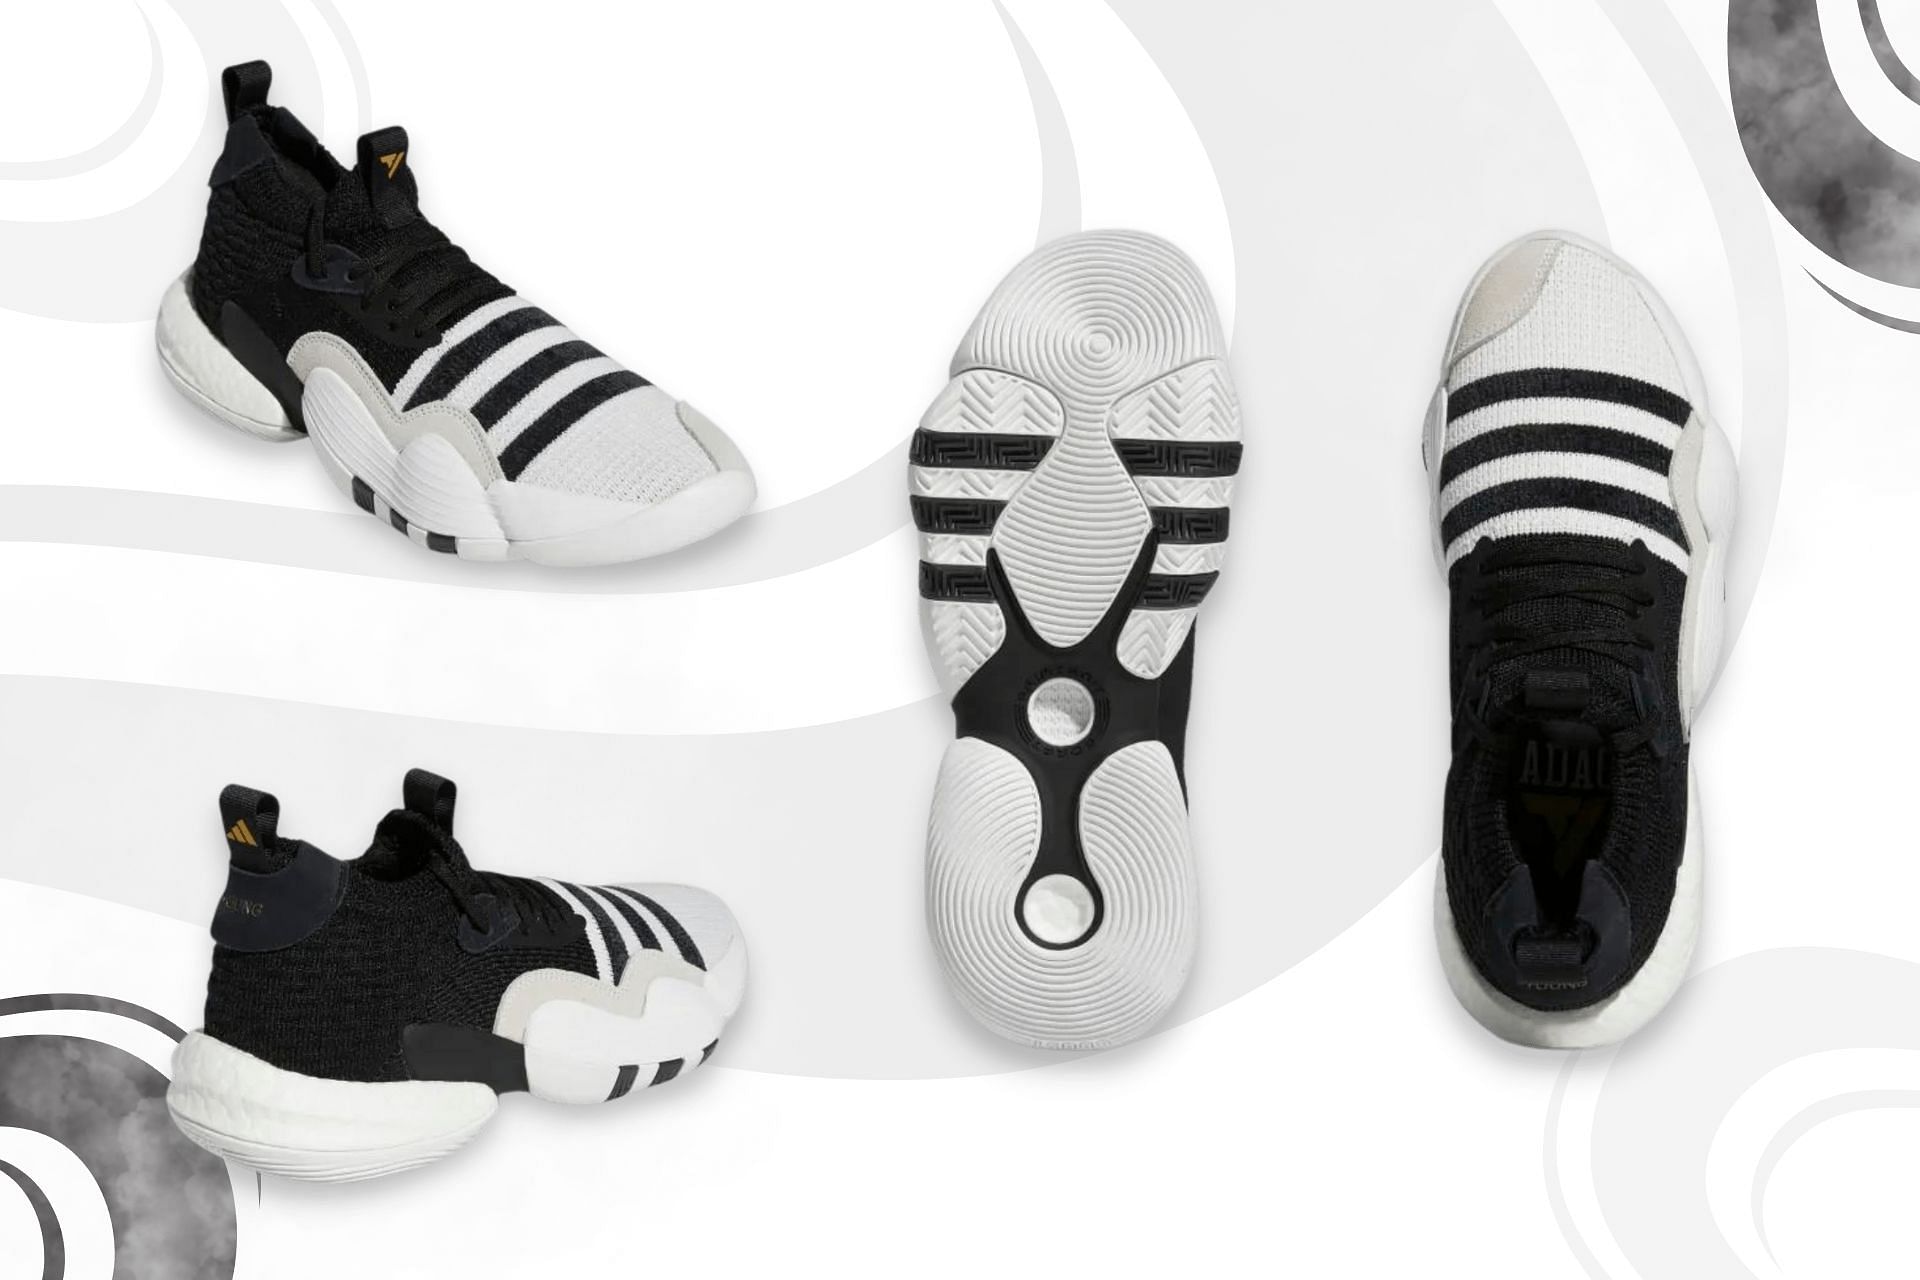 The upcoming Adidas Trae Young 2 &quot;Super Villain&quot; basketball shoes come clad in core black and core white color scheme (Image via Sportskeeda)